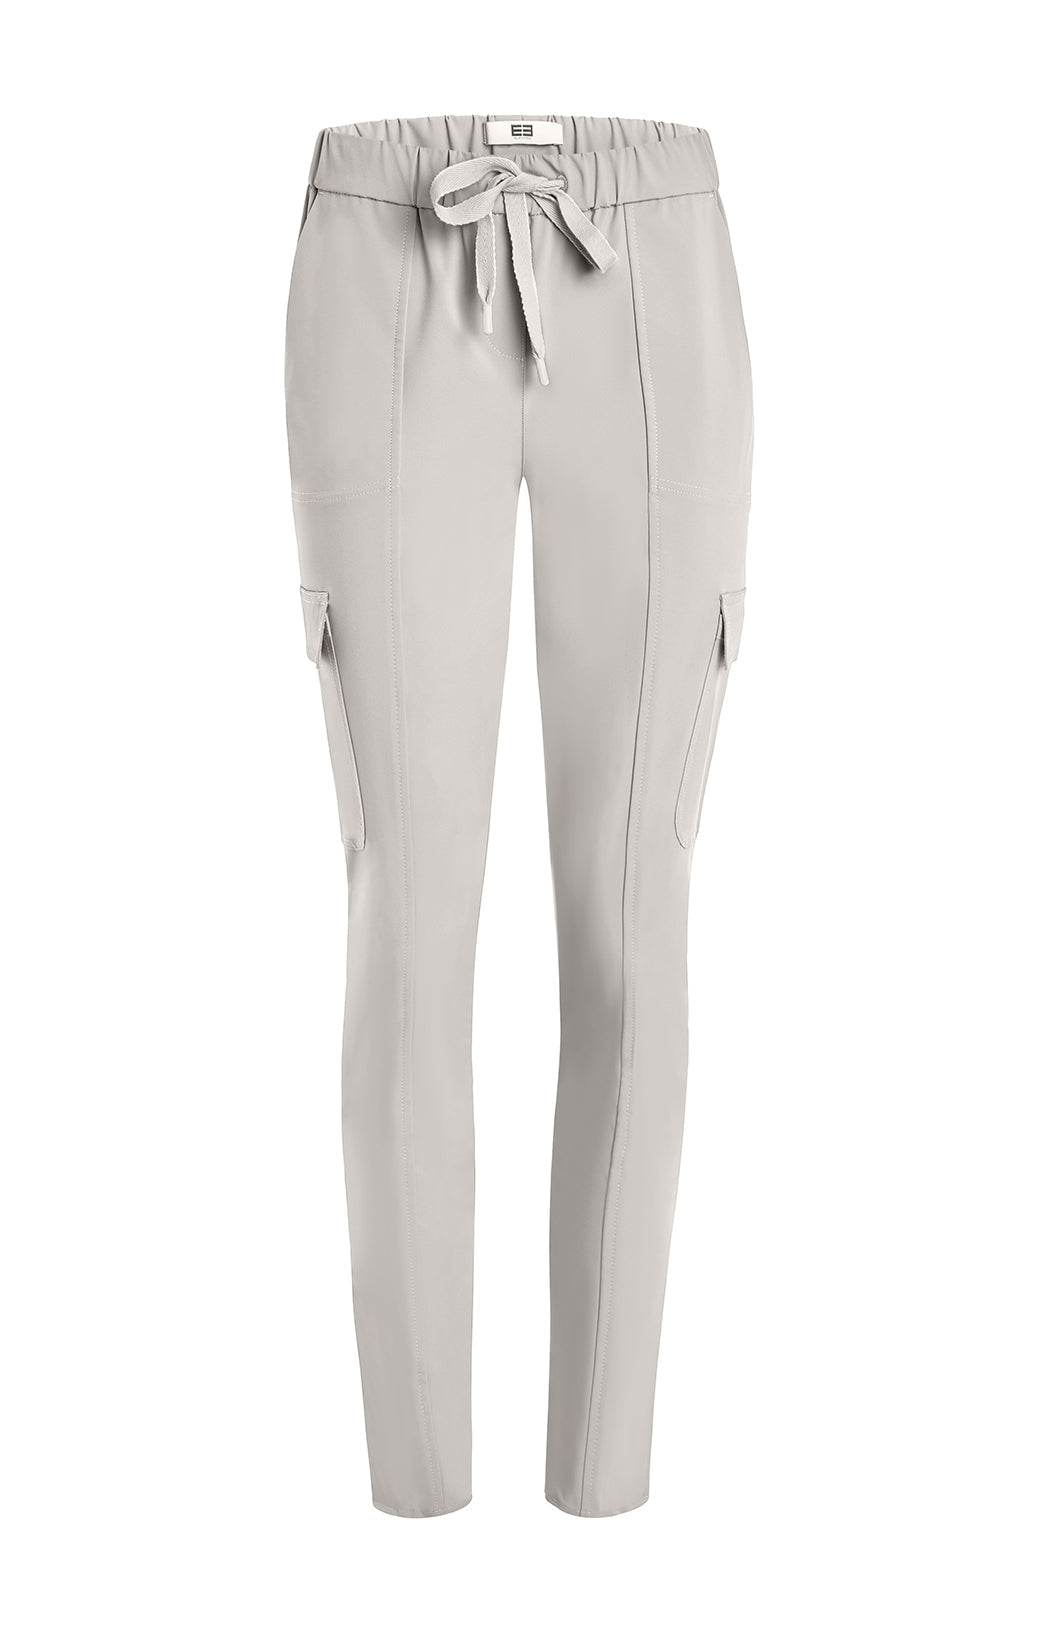 Highlight - Pants In Crêpe-Backed Ponte Knit - Product Image